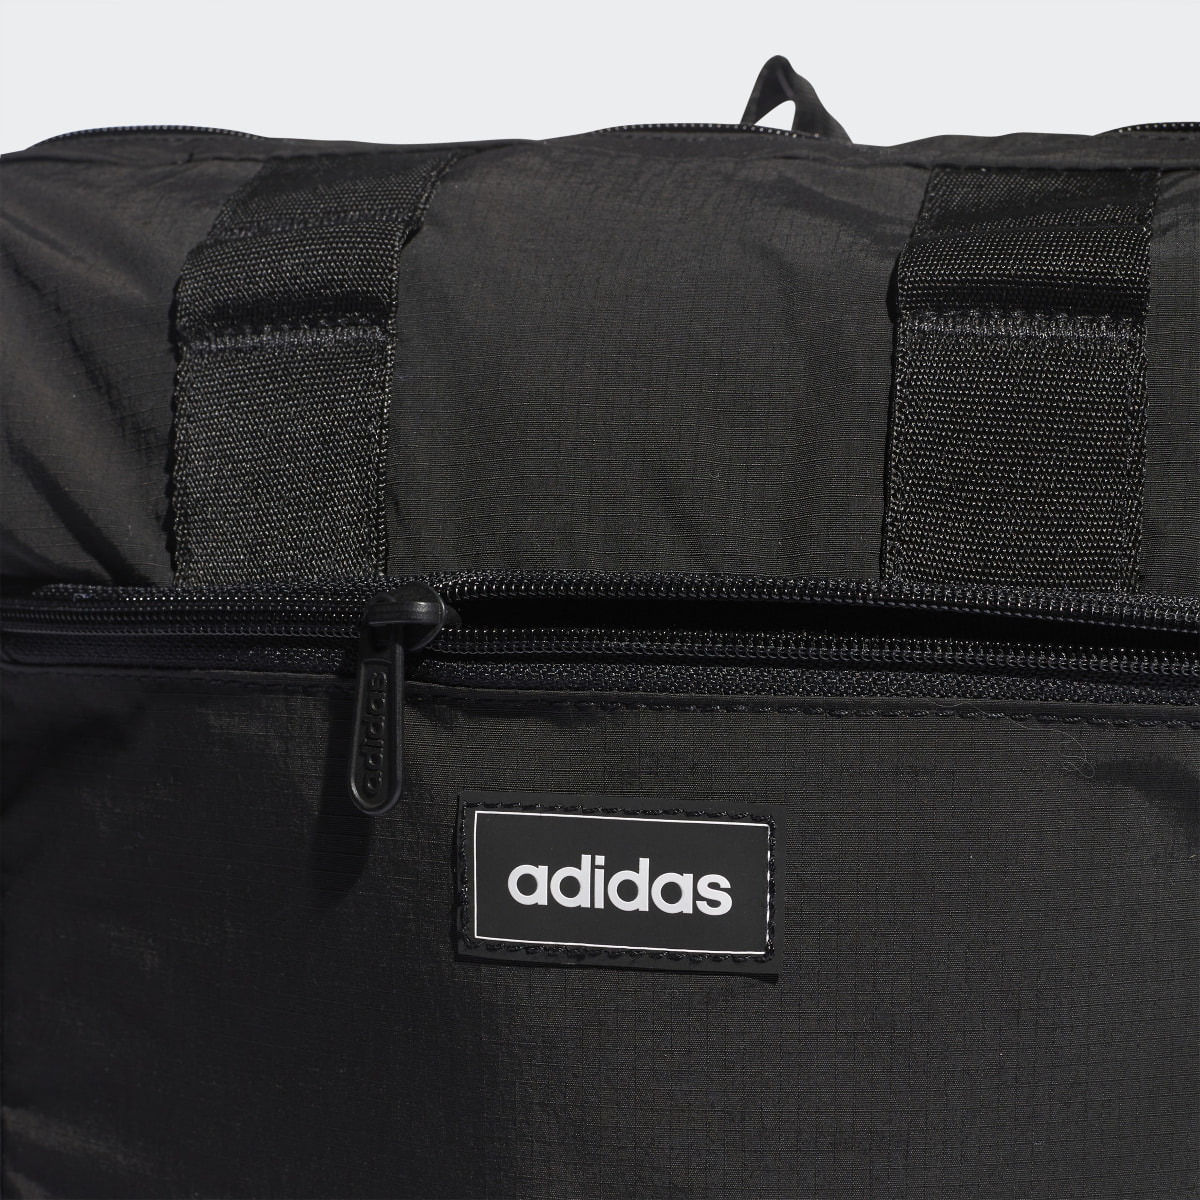 Adidas Sac à dos Tailored For Her Format moyen. 6